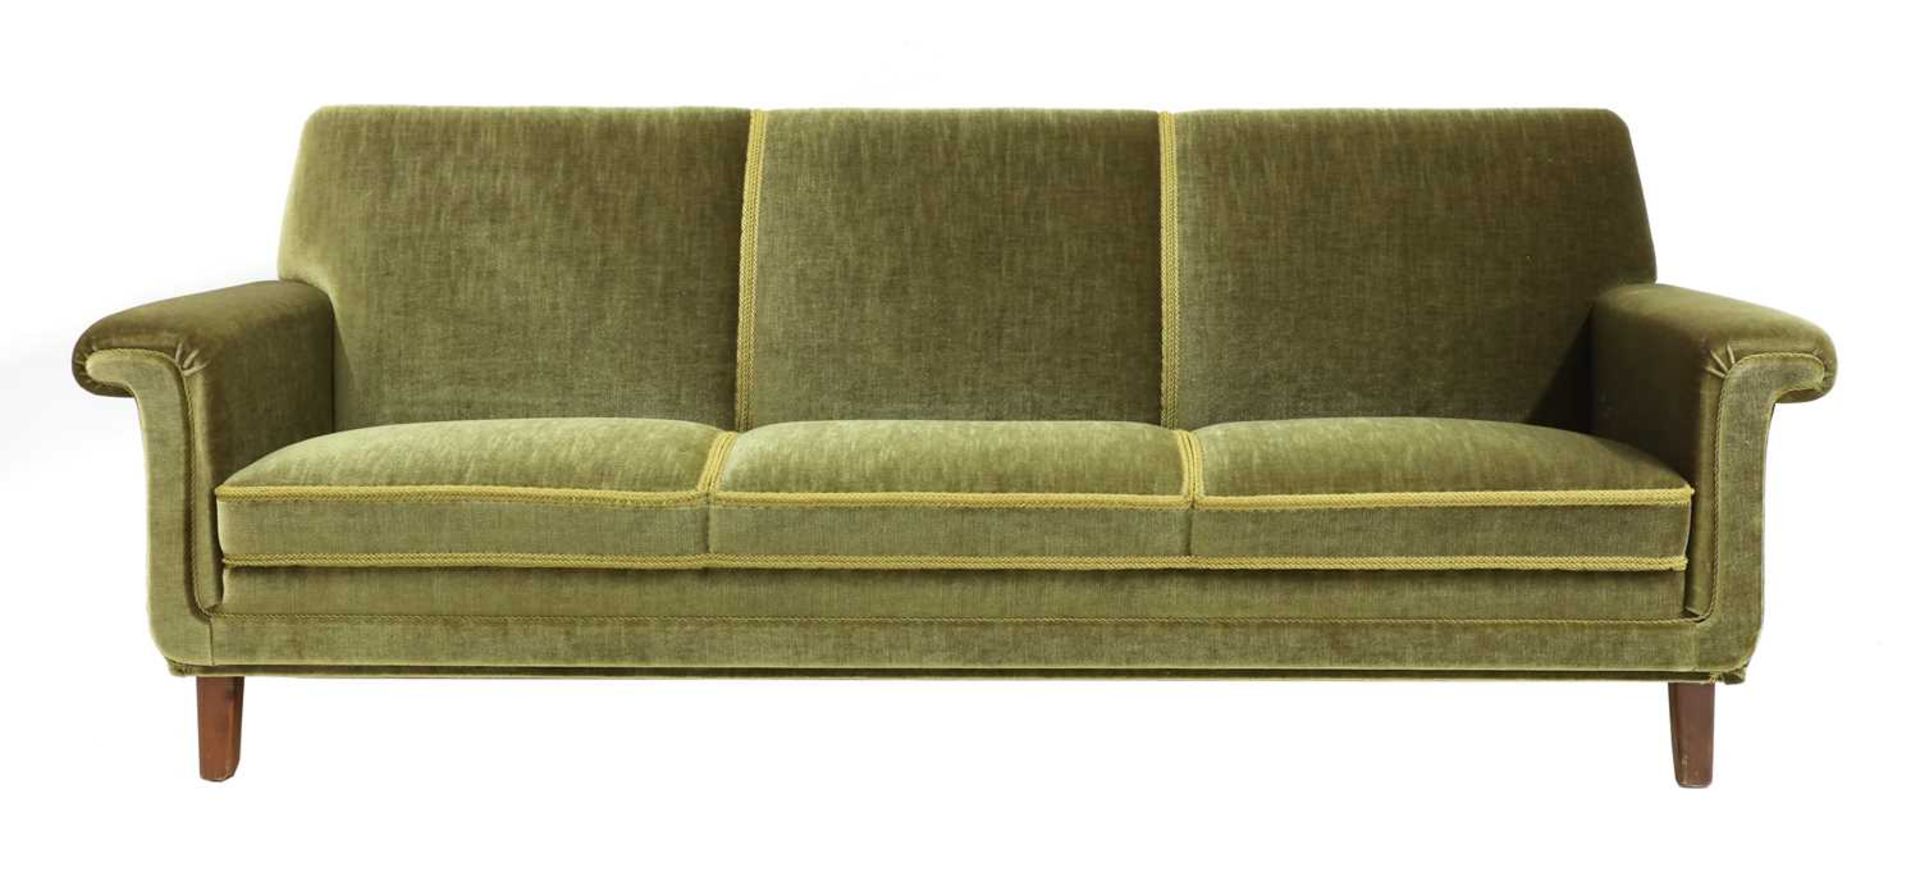 A green velour three-seater settee,